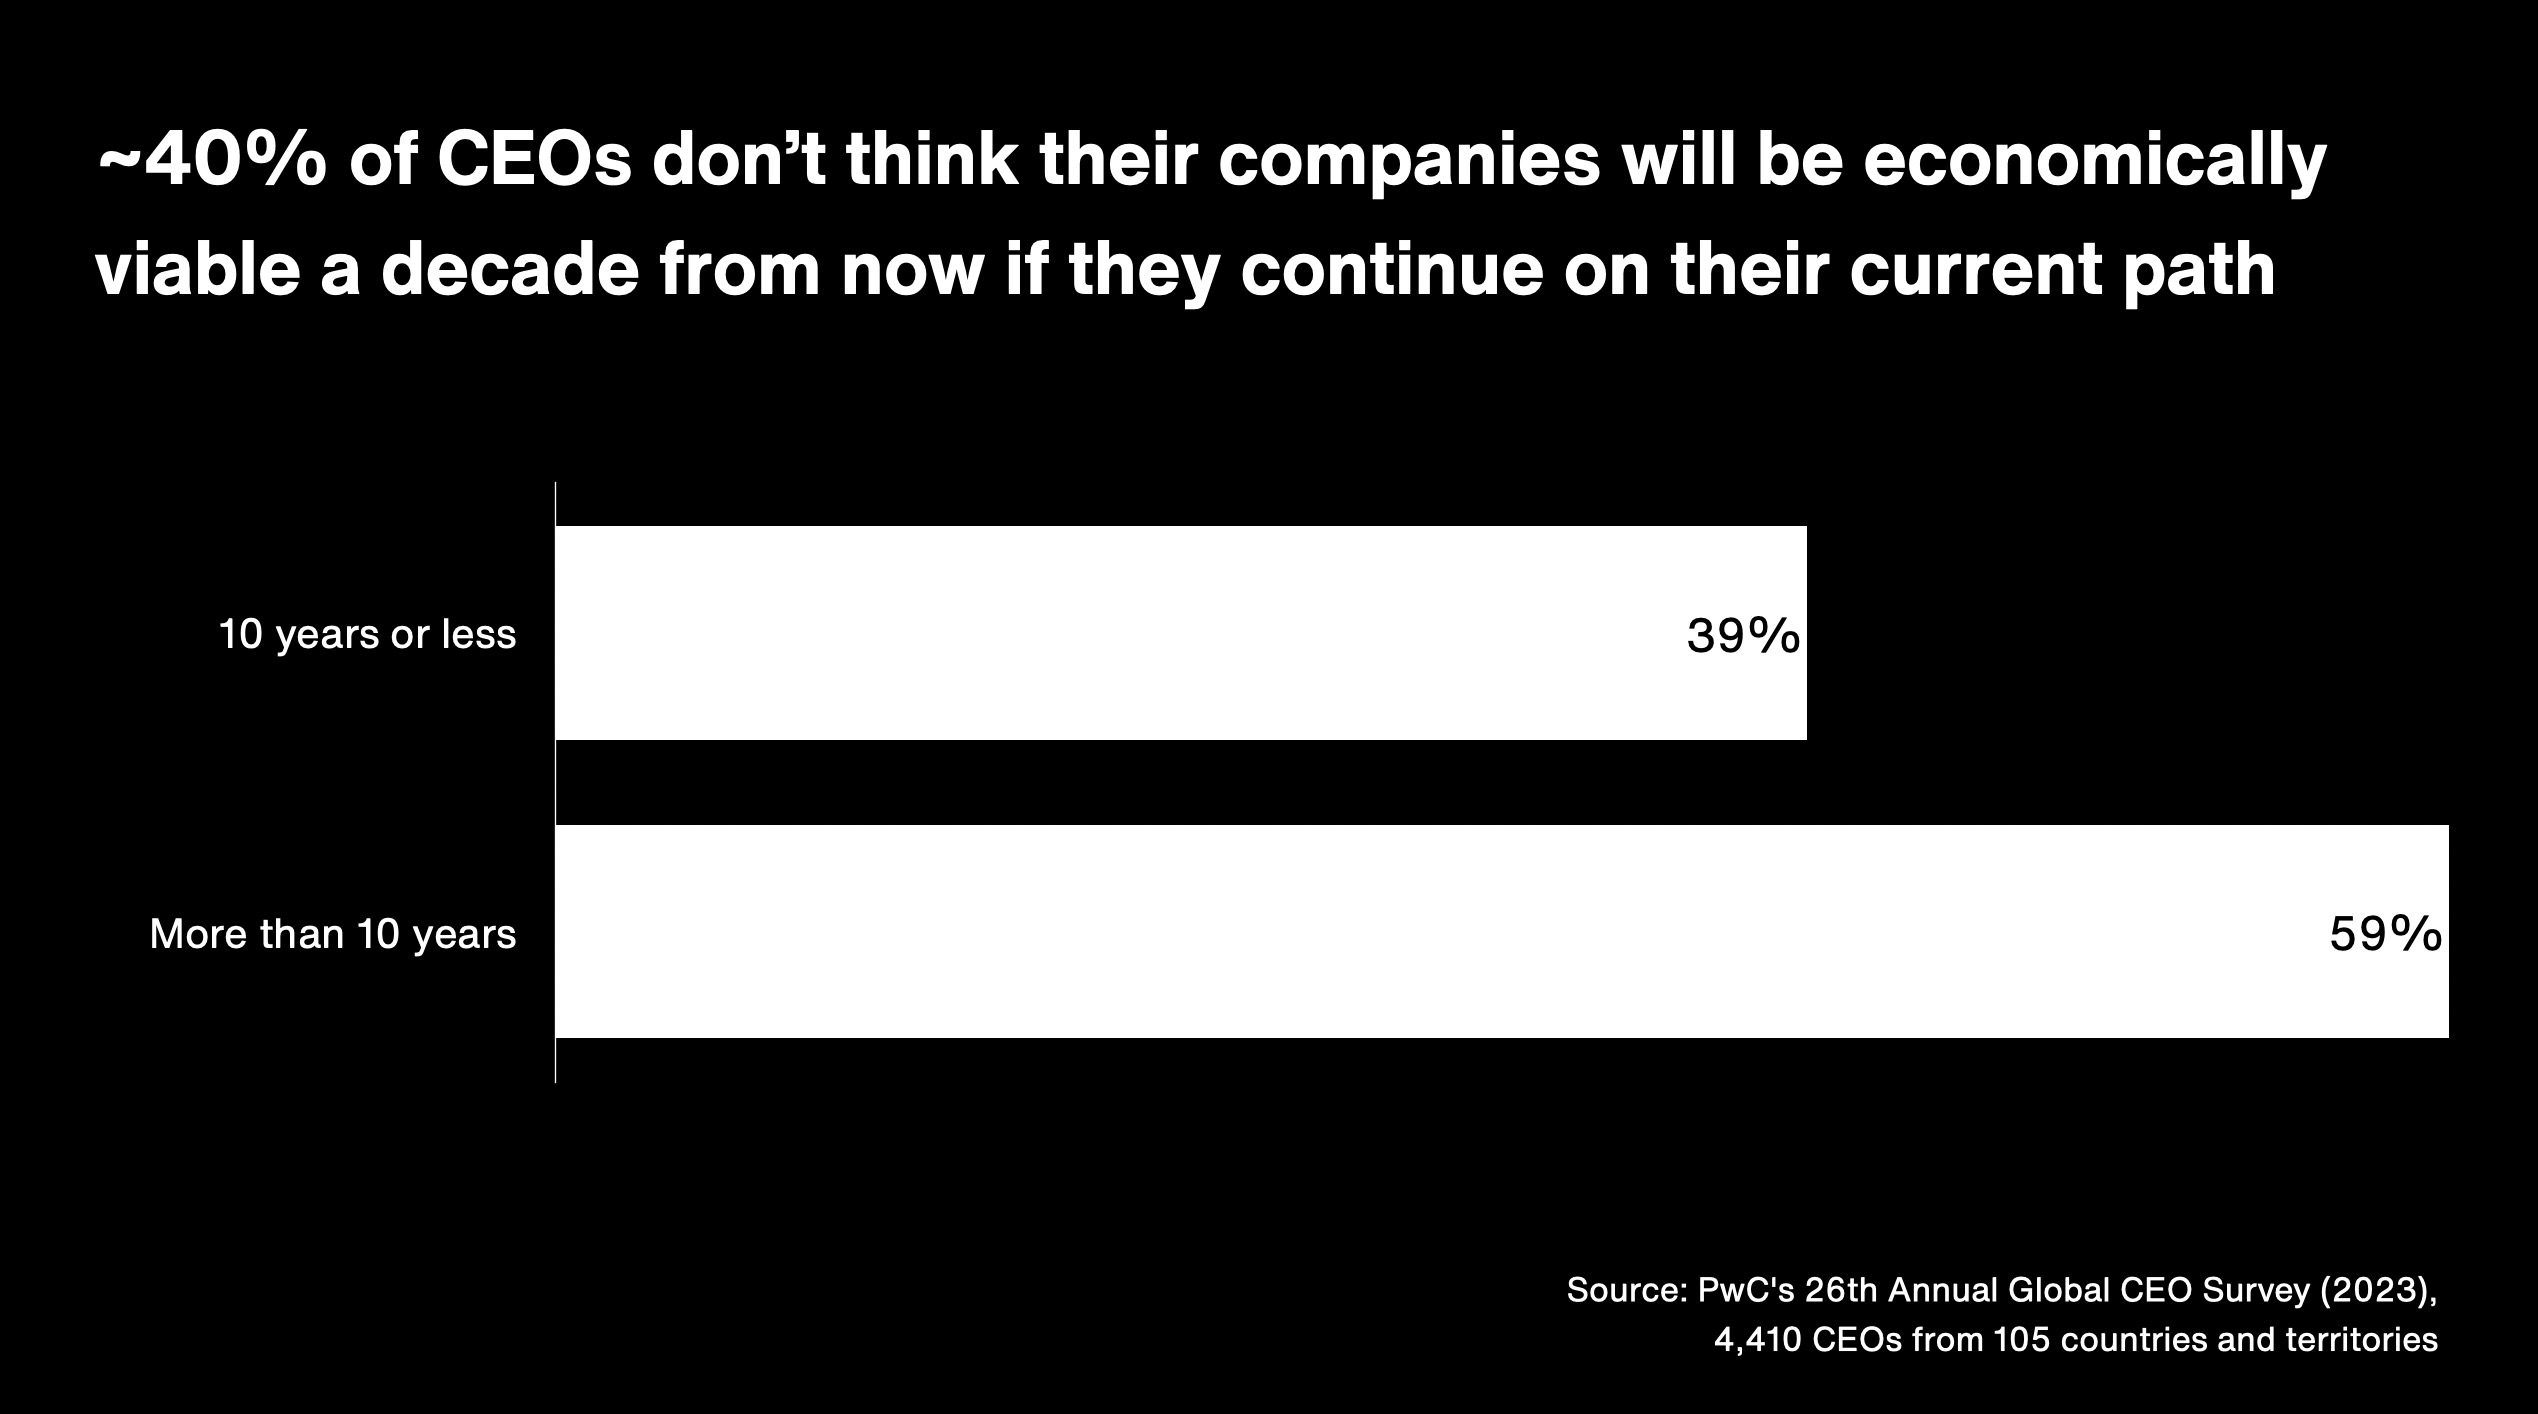 40% of CEOs don't think their companies will be economically viable a decade from now